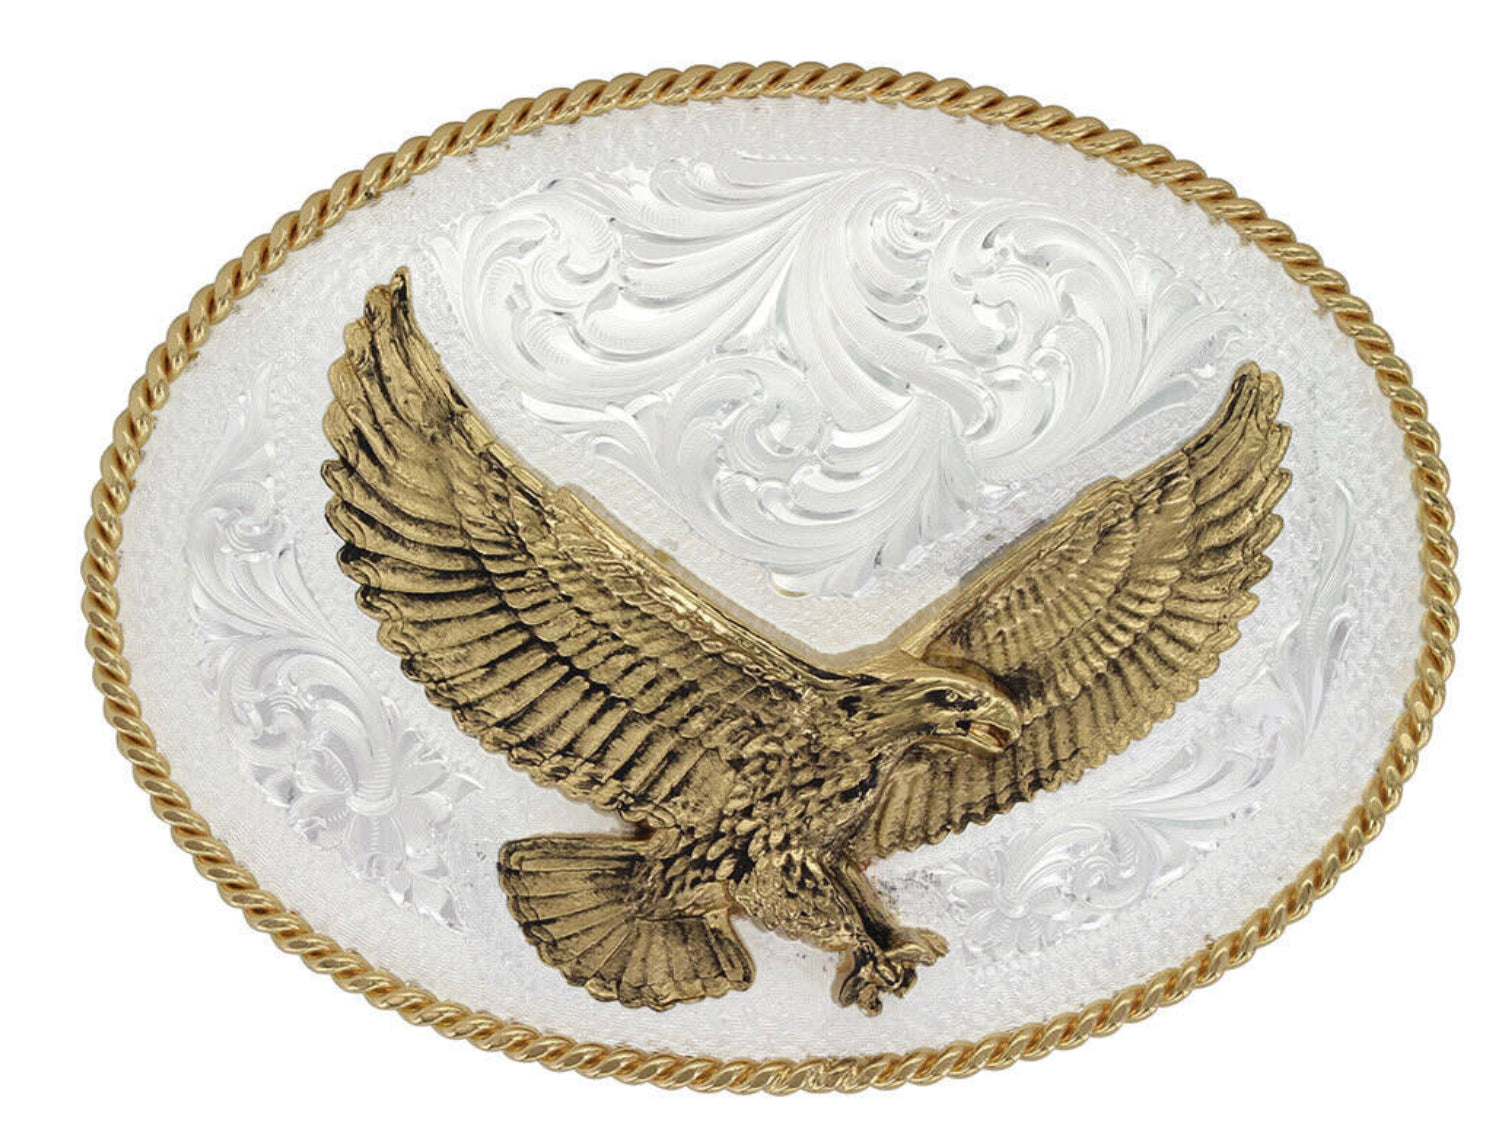 Montana Silversmiths Silver Engraved Western Belt Buckle with Large Eagle